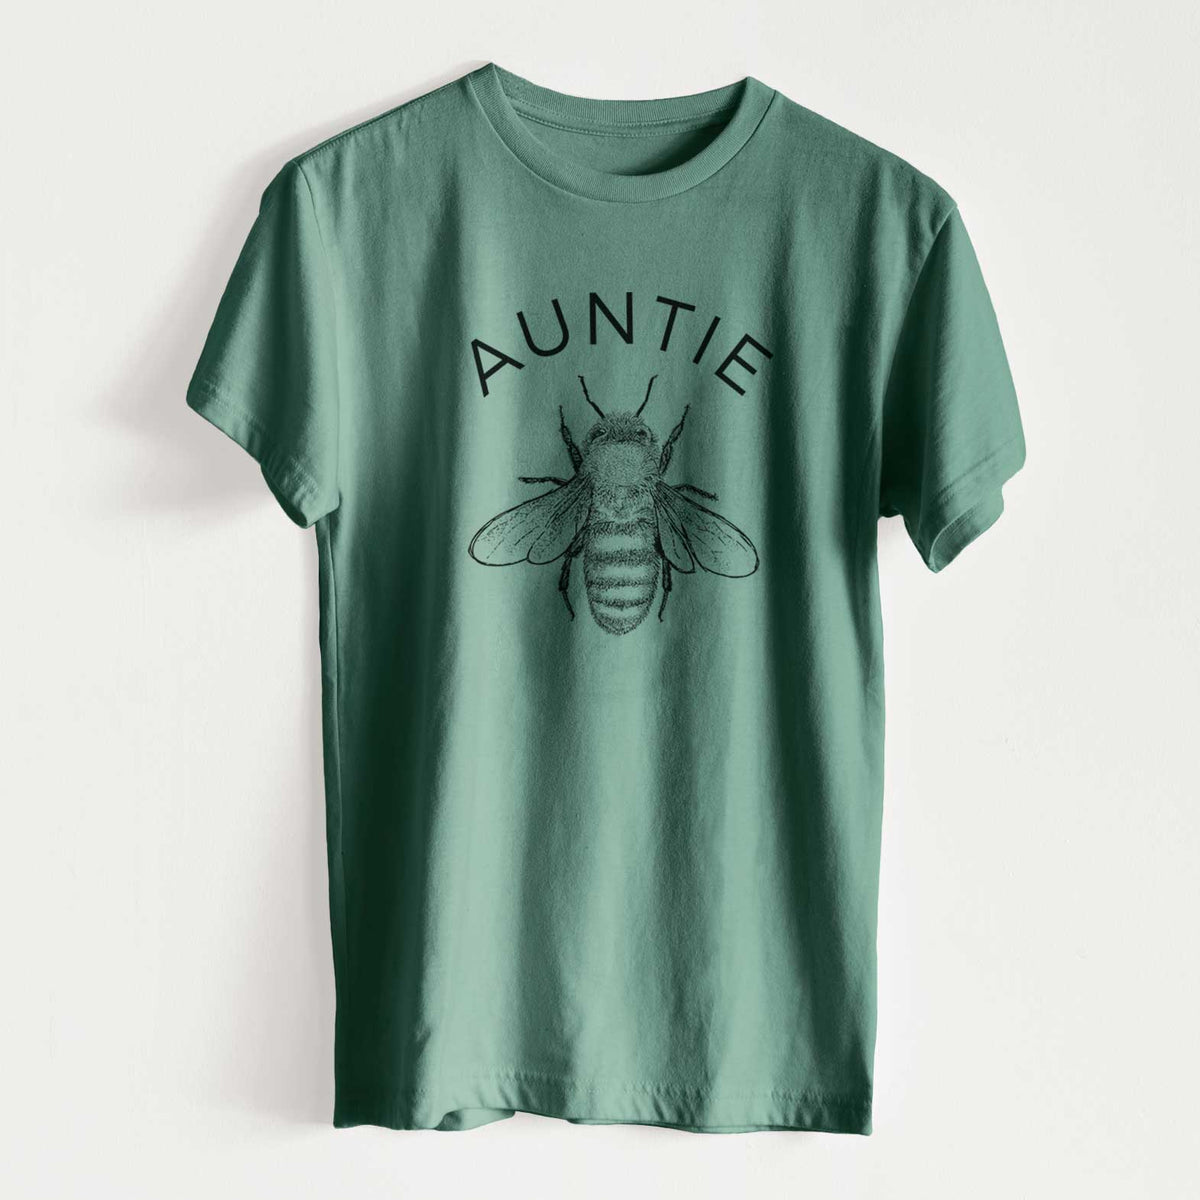 Auntie Bee - Unisex Recycled Eco Tee  - CLOSEOUT - FINAL SALE